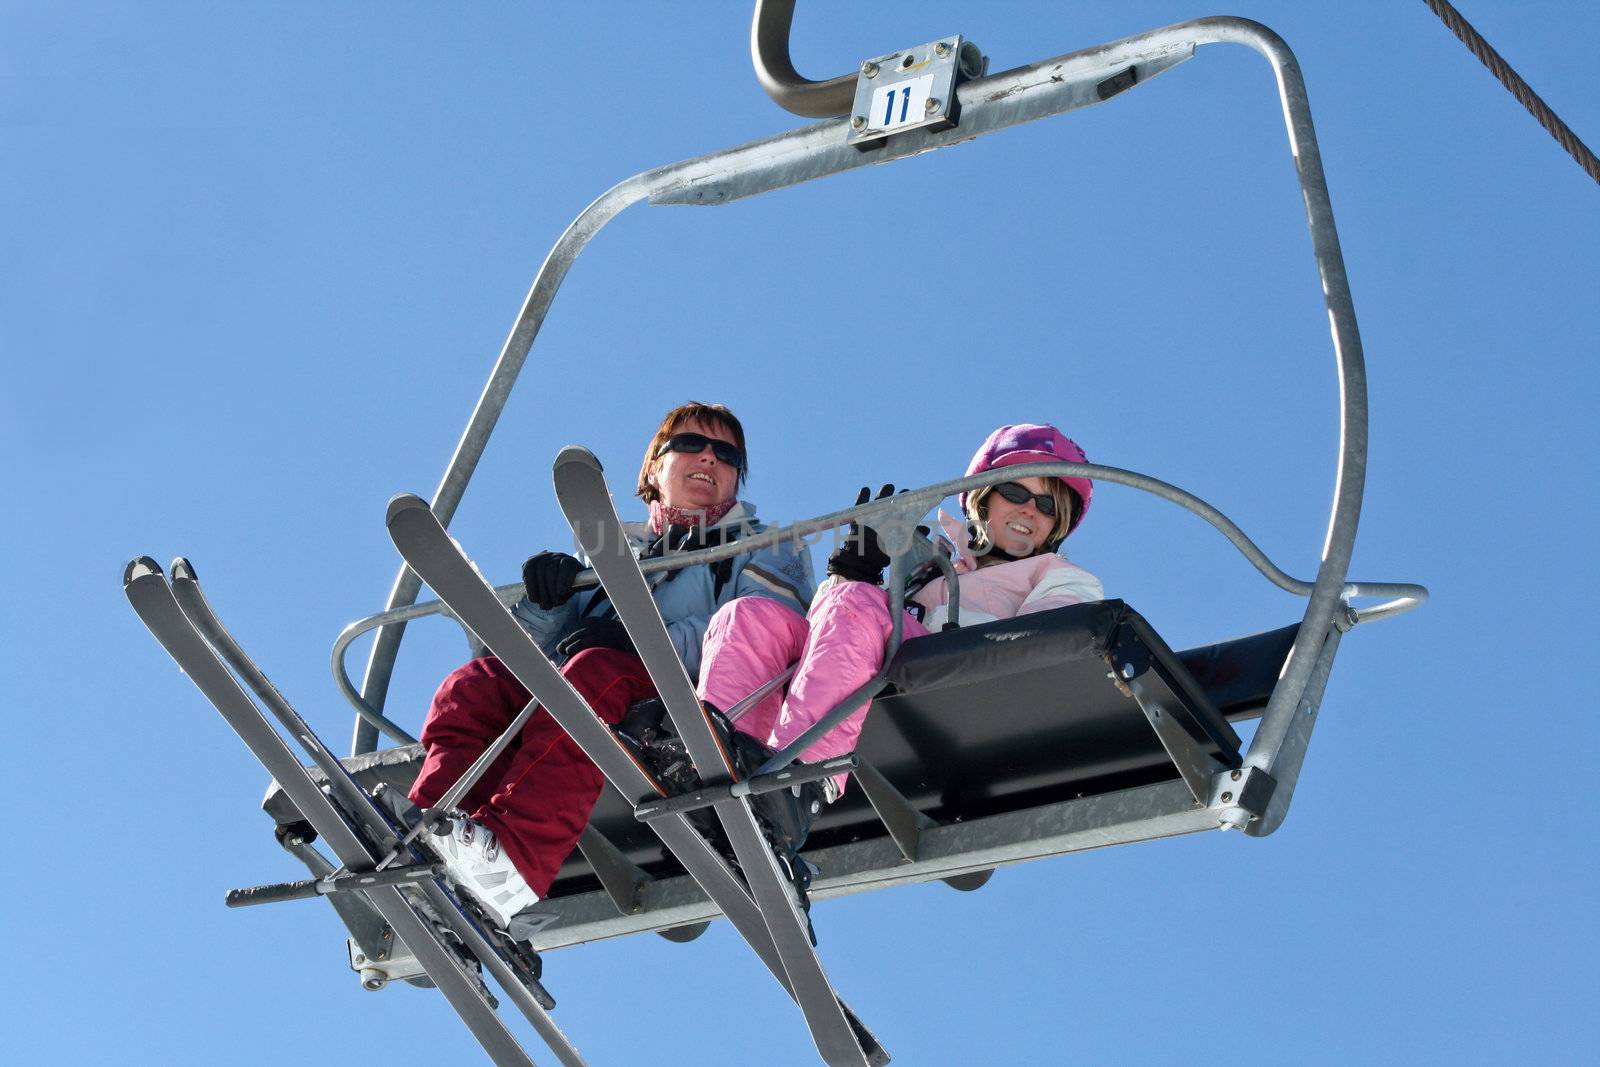 Two women riding the Ski lift by groomee